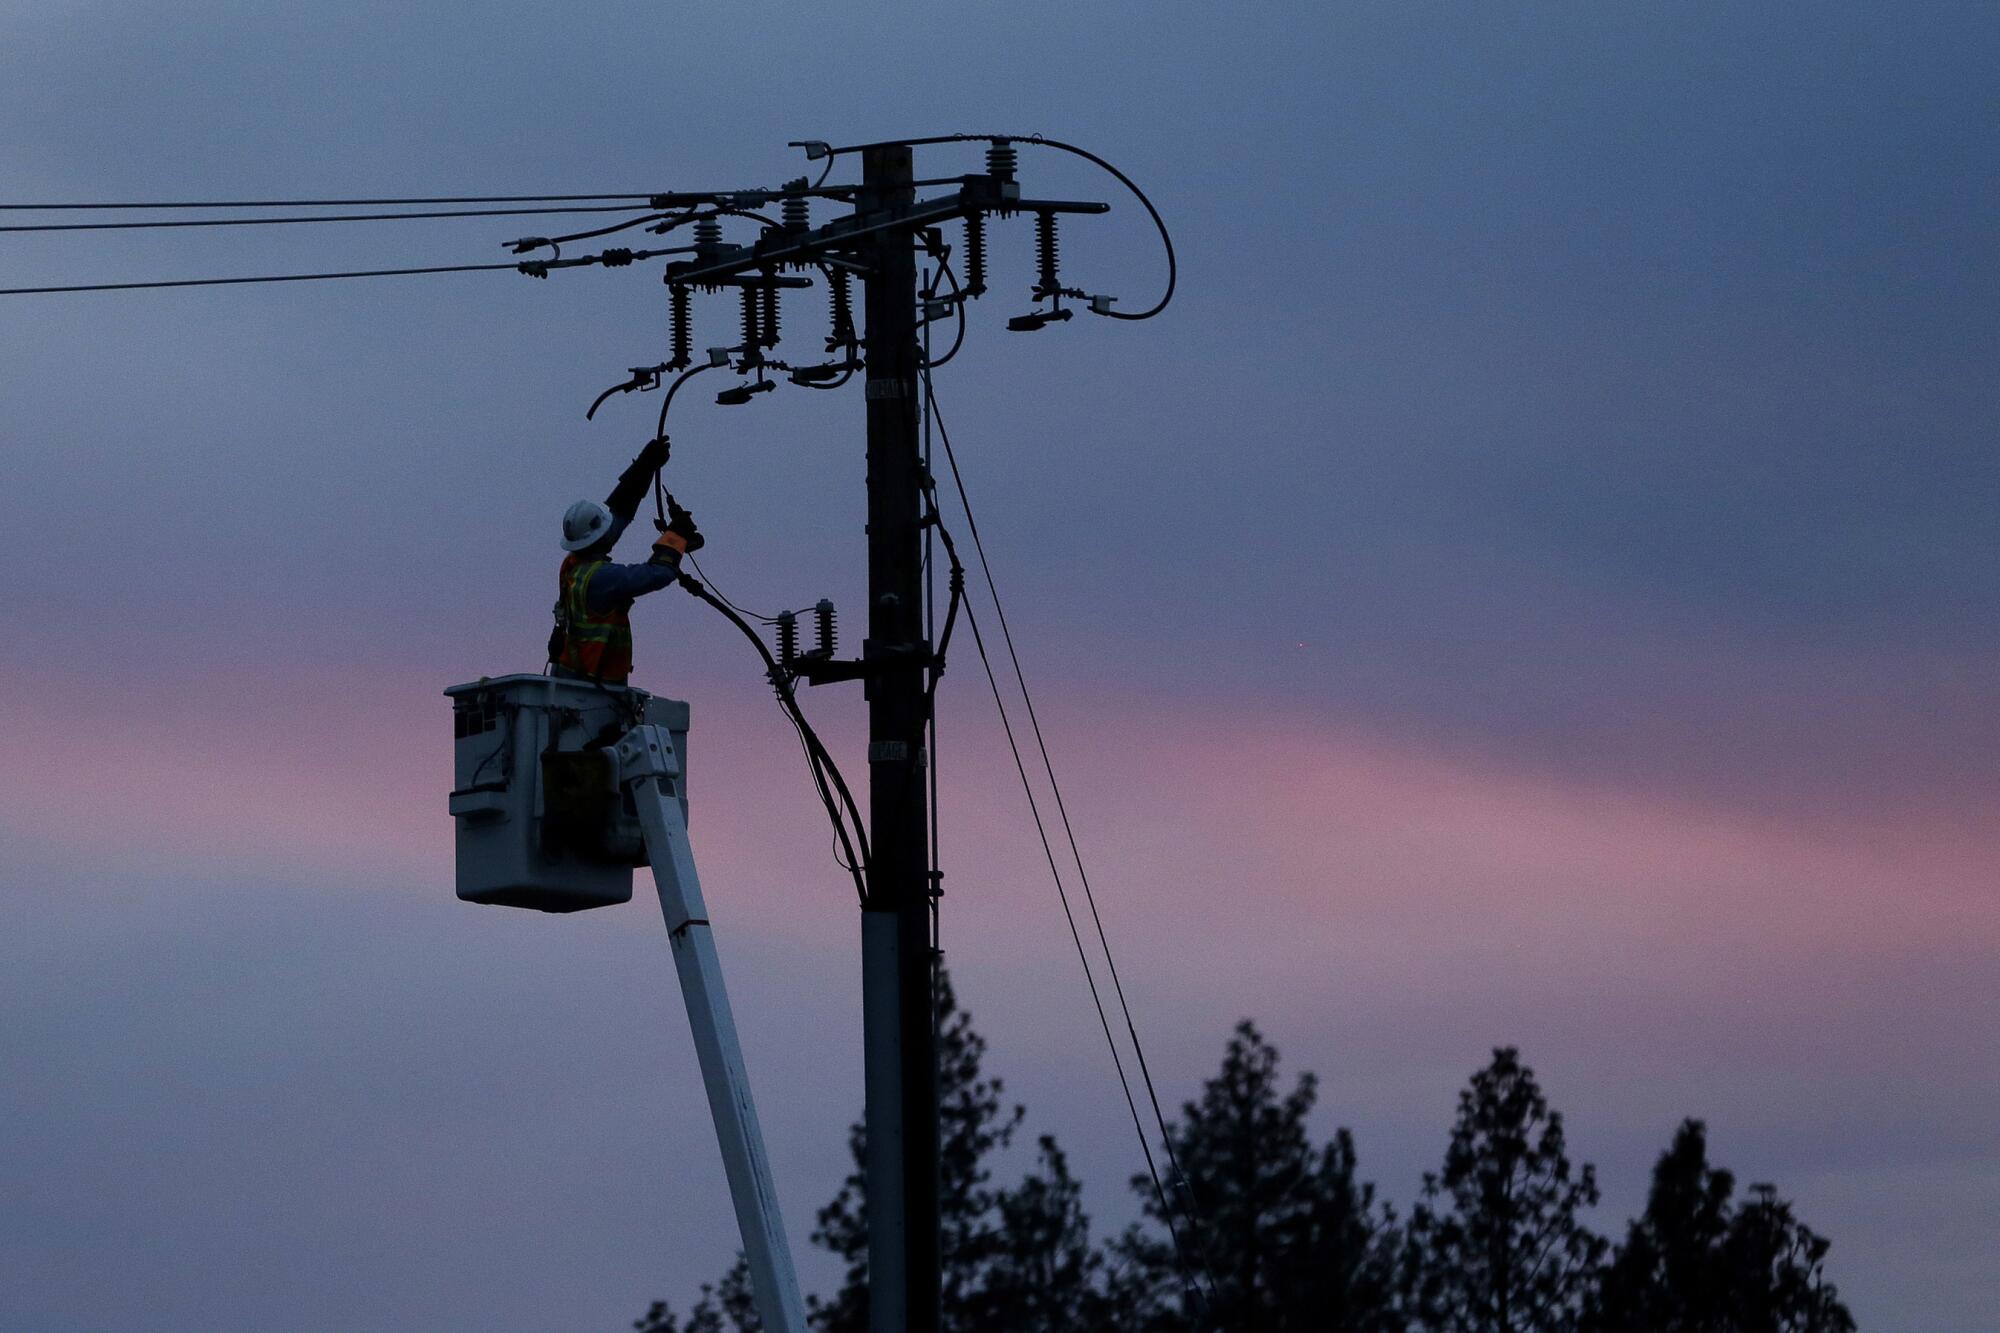 A Pacific Gas & Electric lineman works to repair a power line.